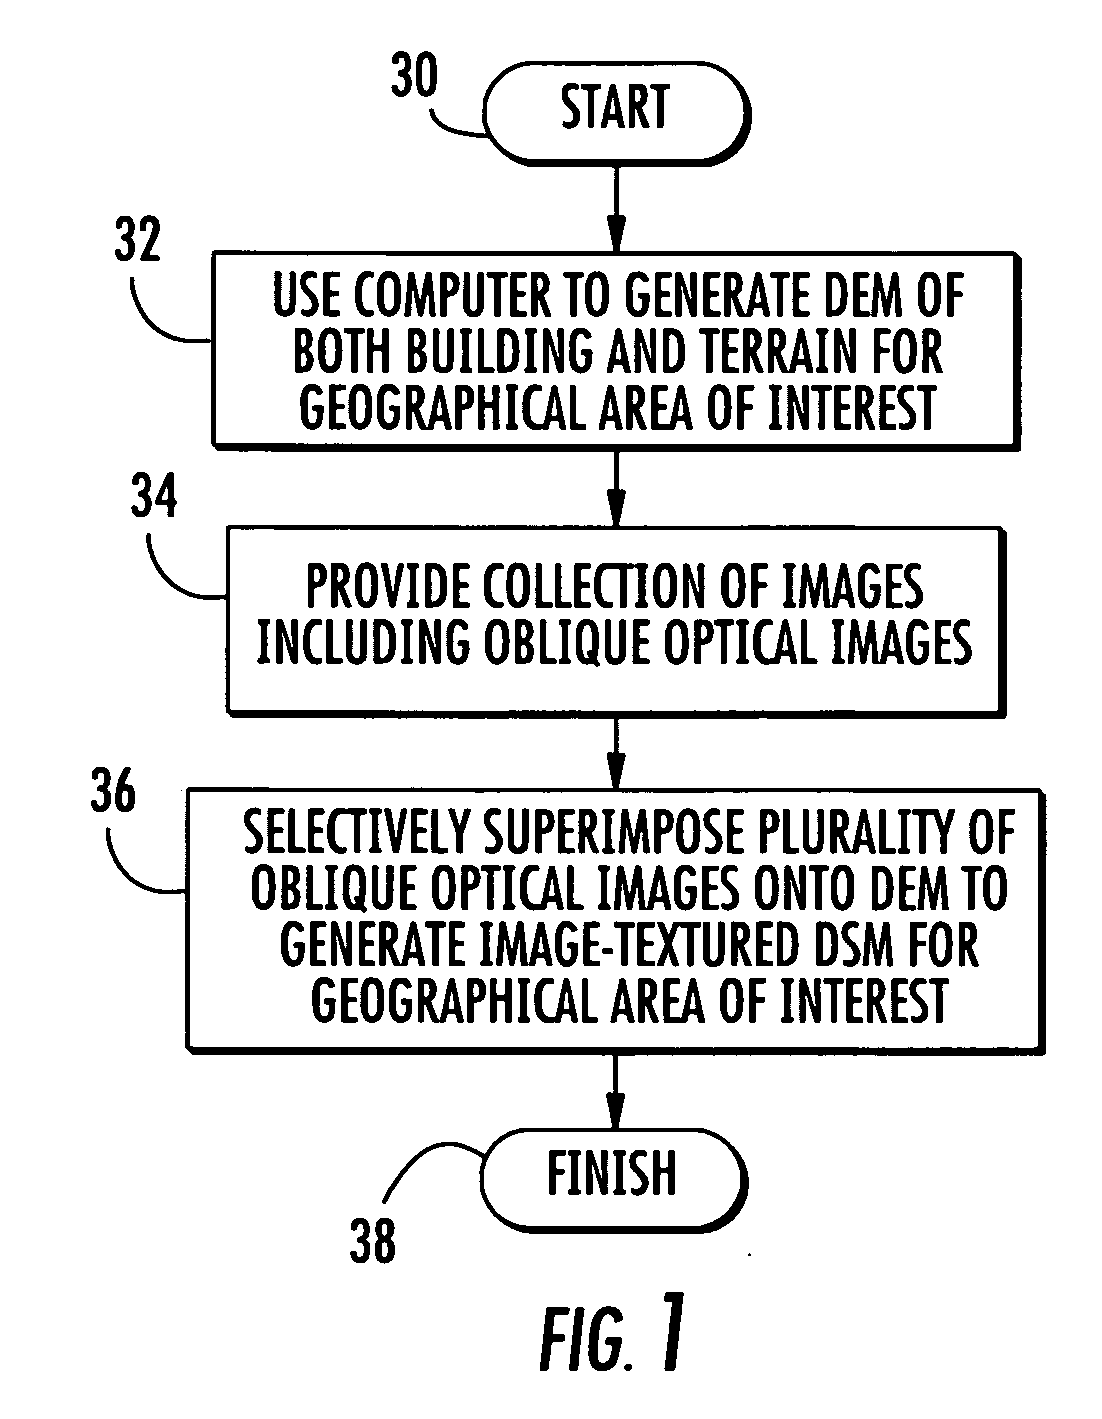 Method and System for Generating an Image-Textured Digital Surface Model (DSM) for a Geographical Area of Interest